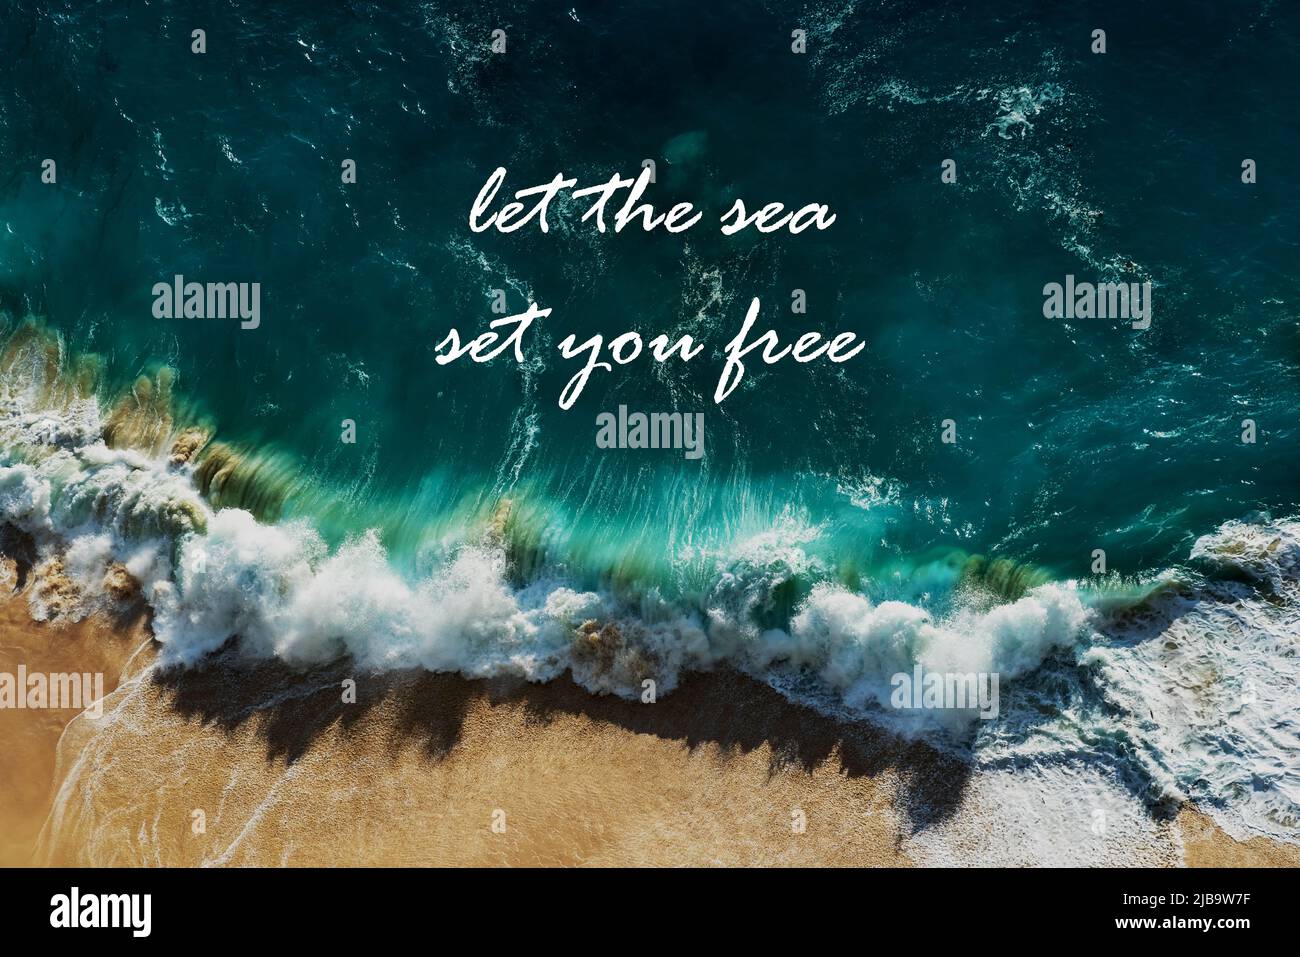 Motivational and inspirational quotes -  Let the ocean set your free Stock Photo